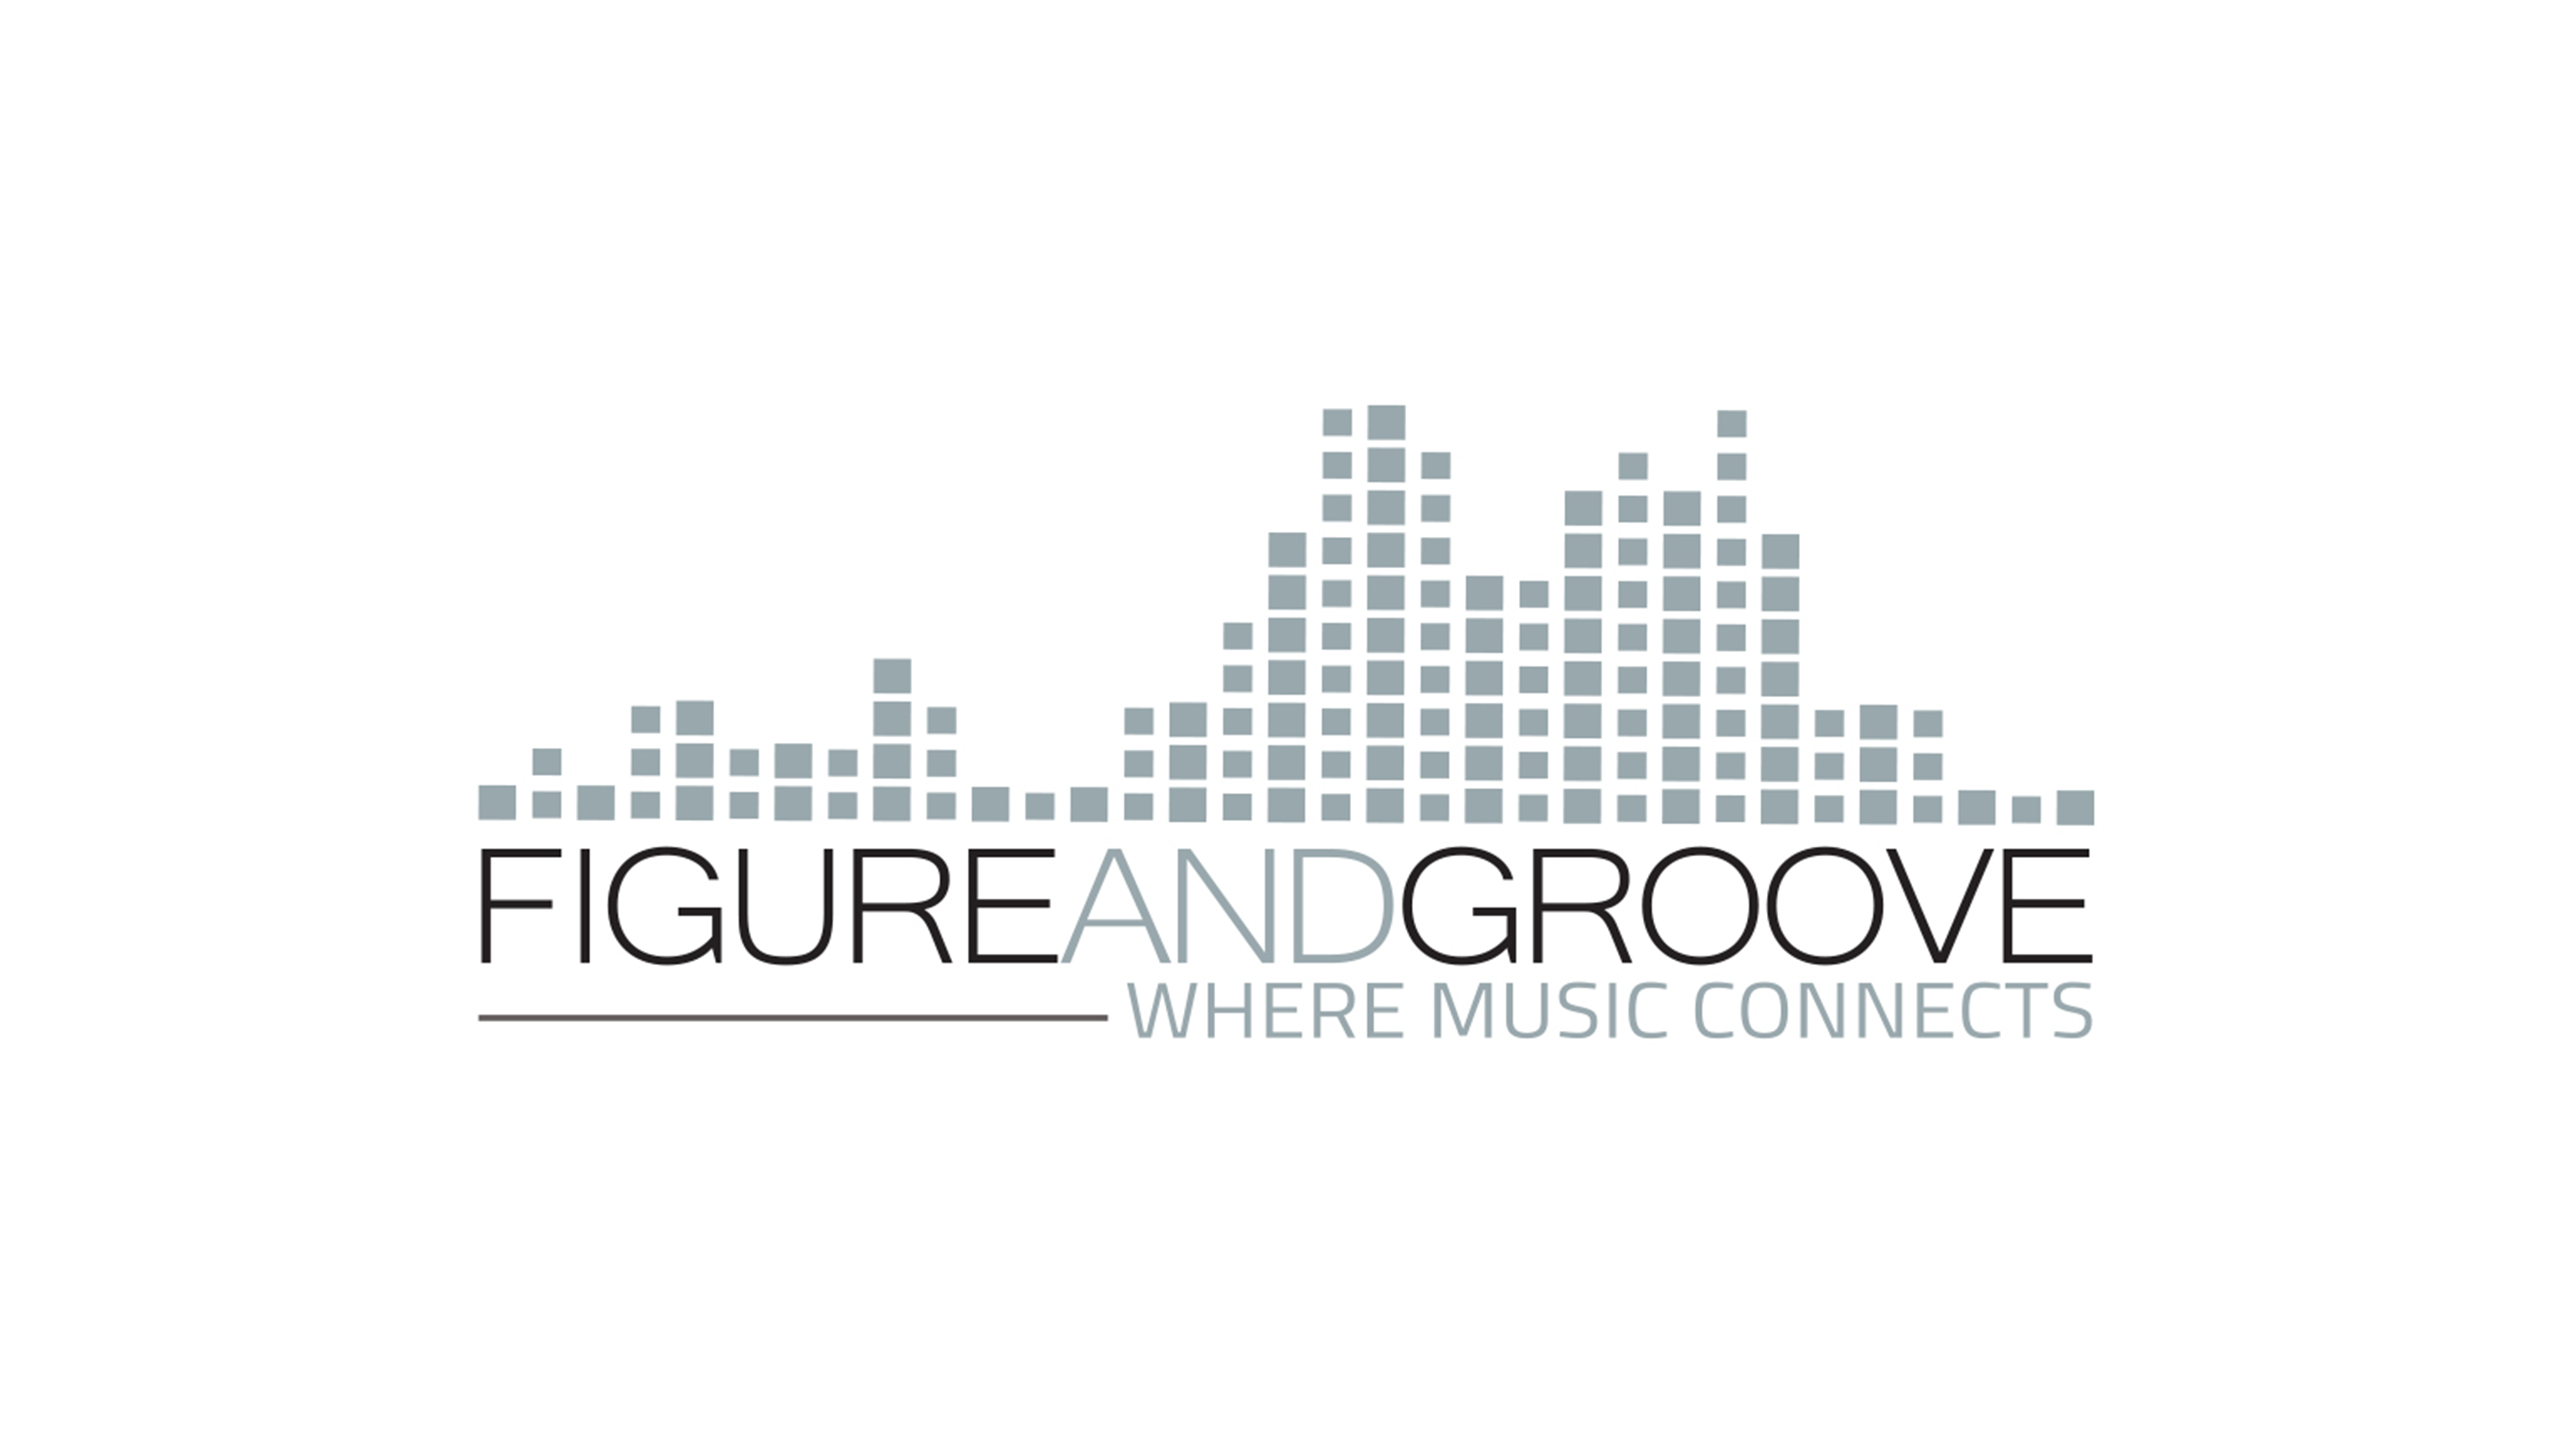 Figure and groove logo